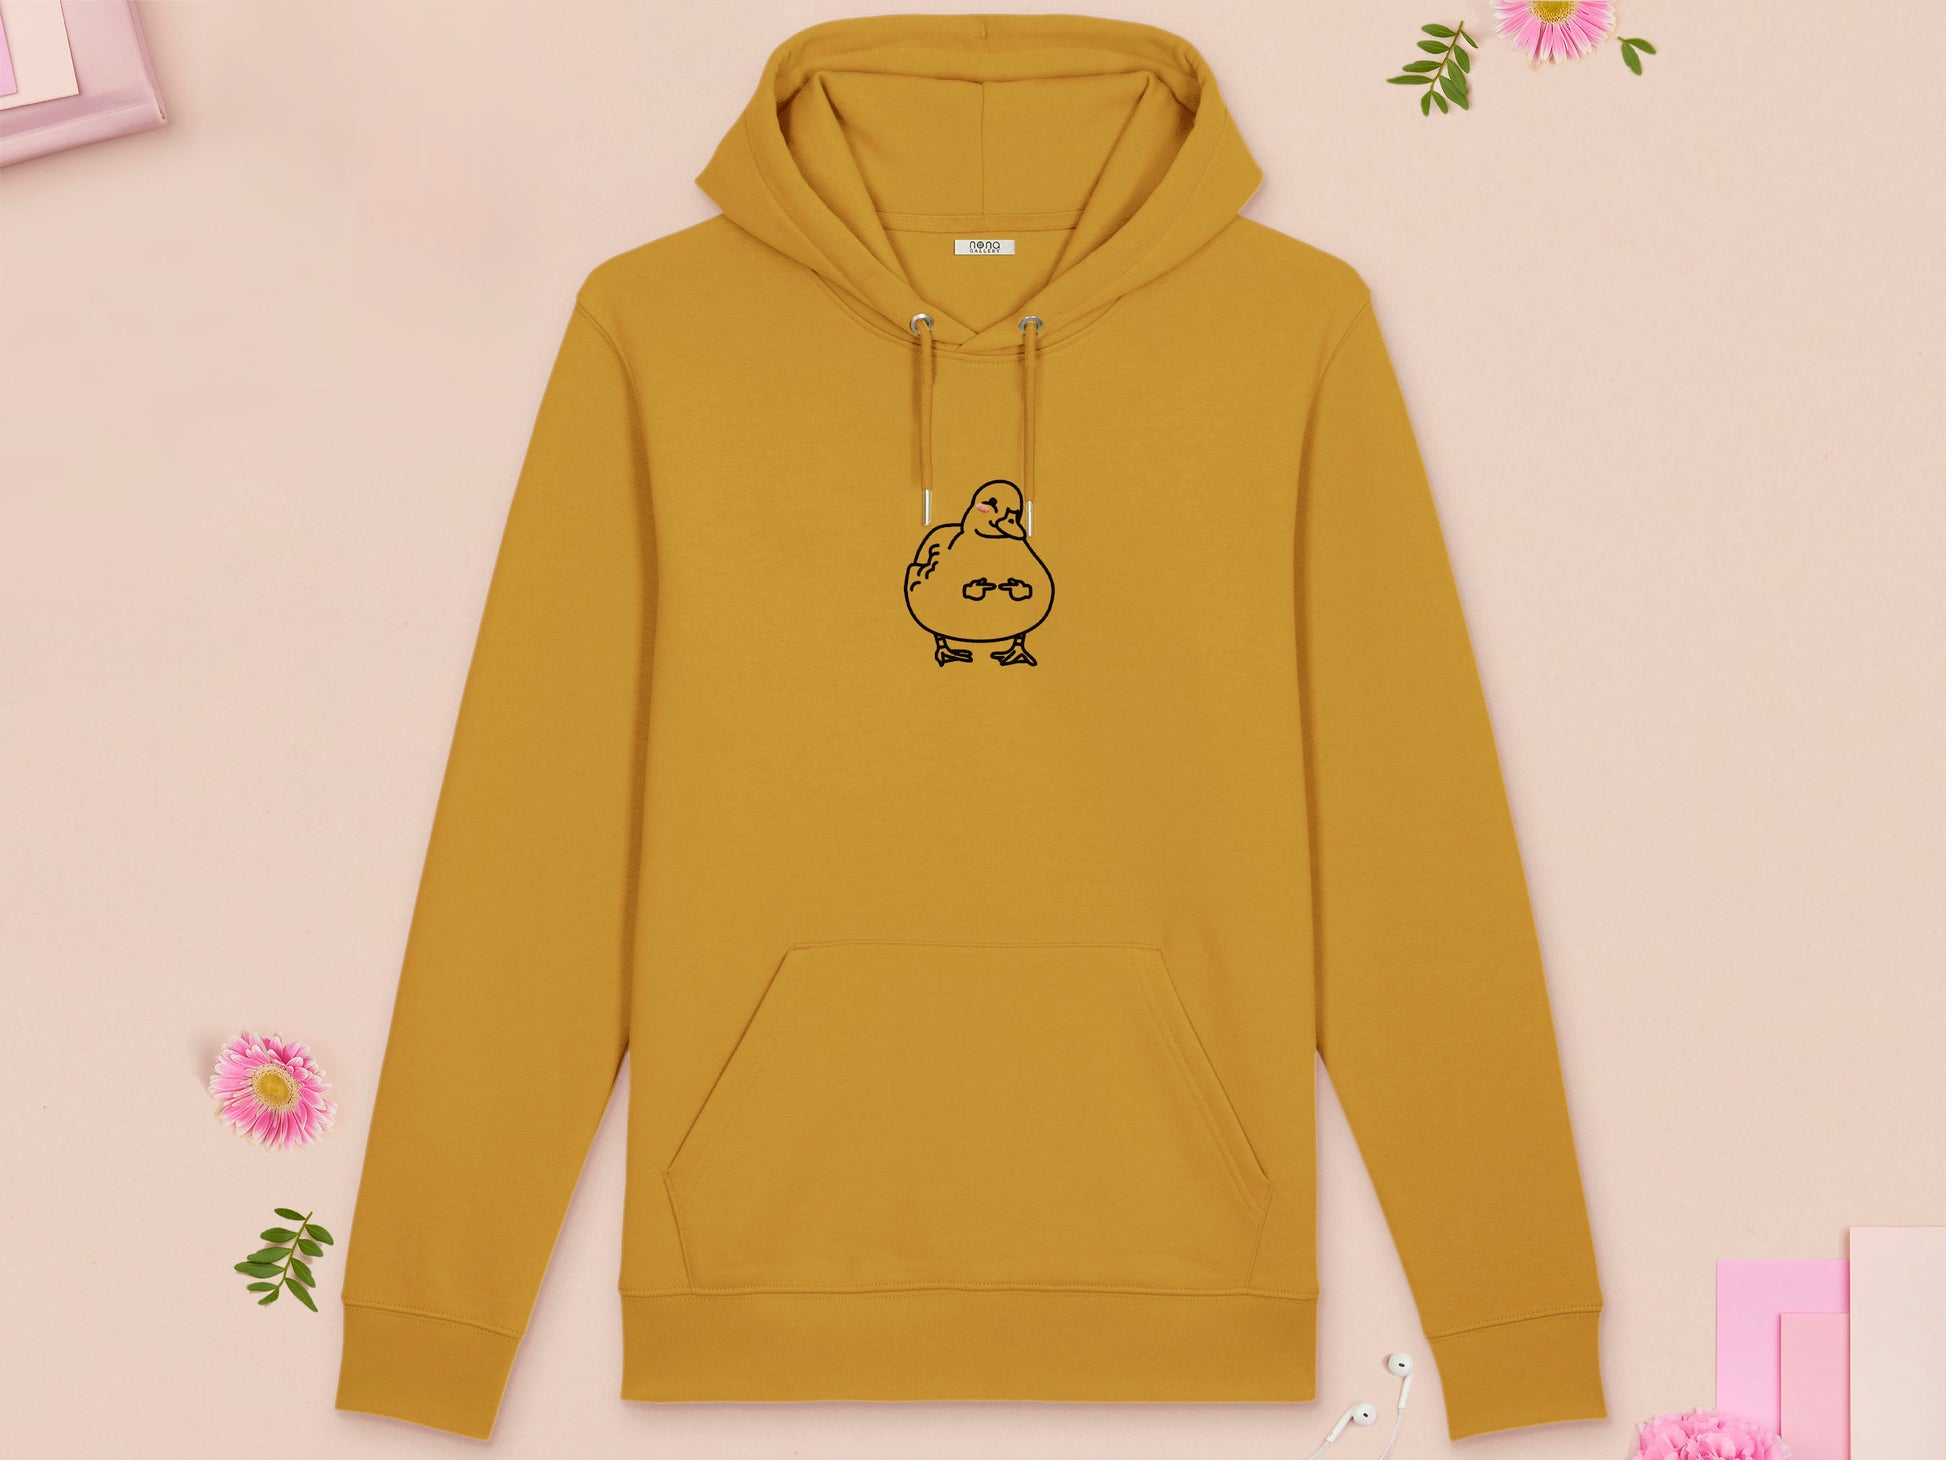 A yellow long sleeve fleece hoodie, with an embroidered black thread design of cute blushing duck with the for me finger hand emoji symbols